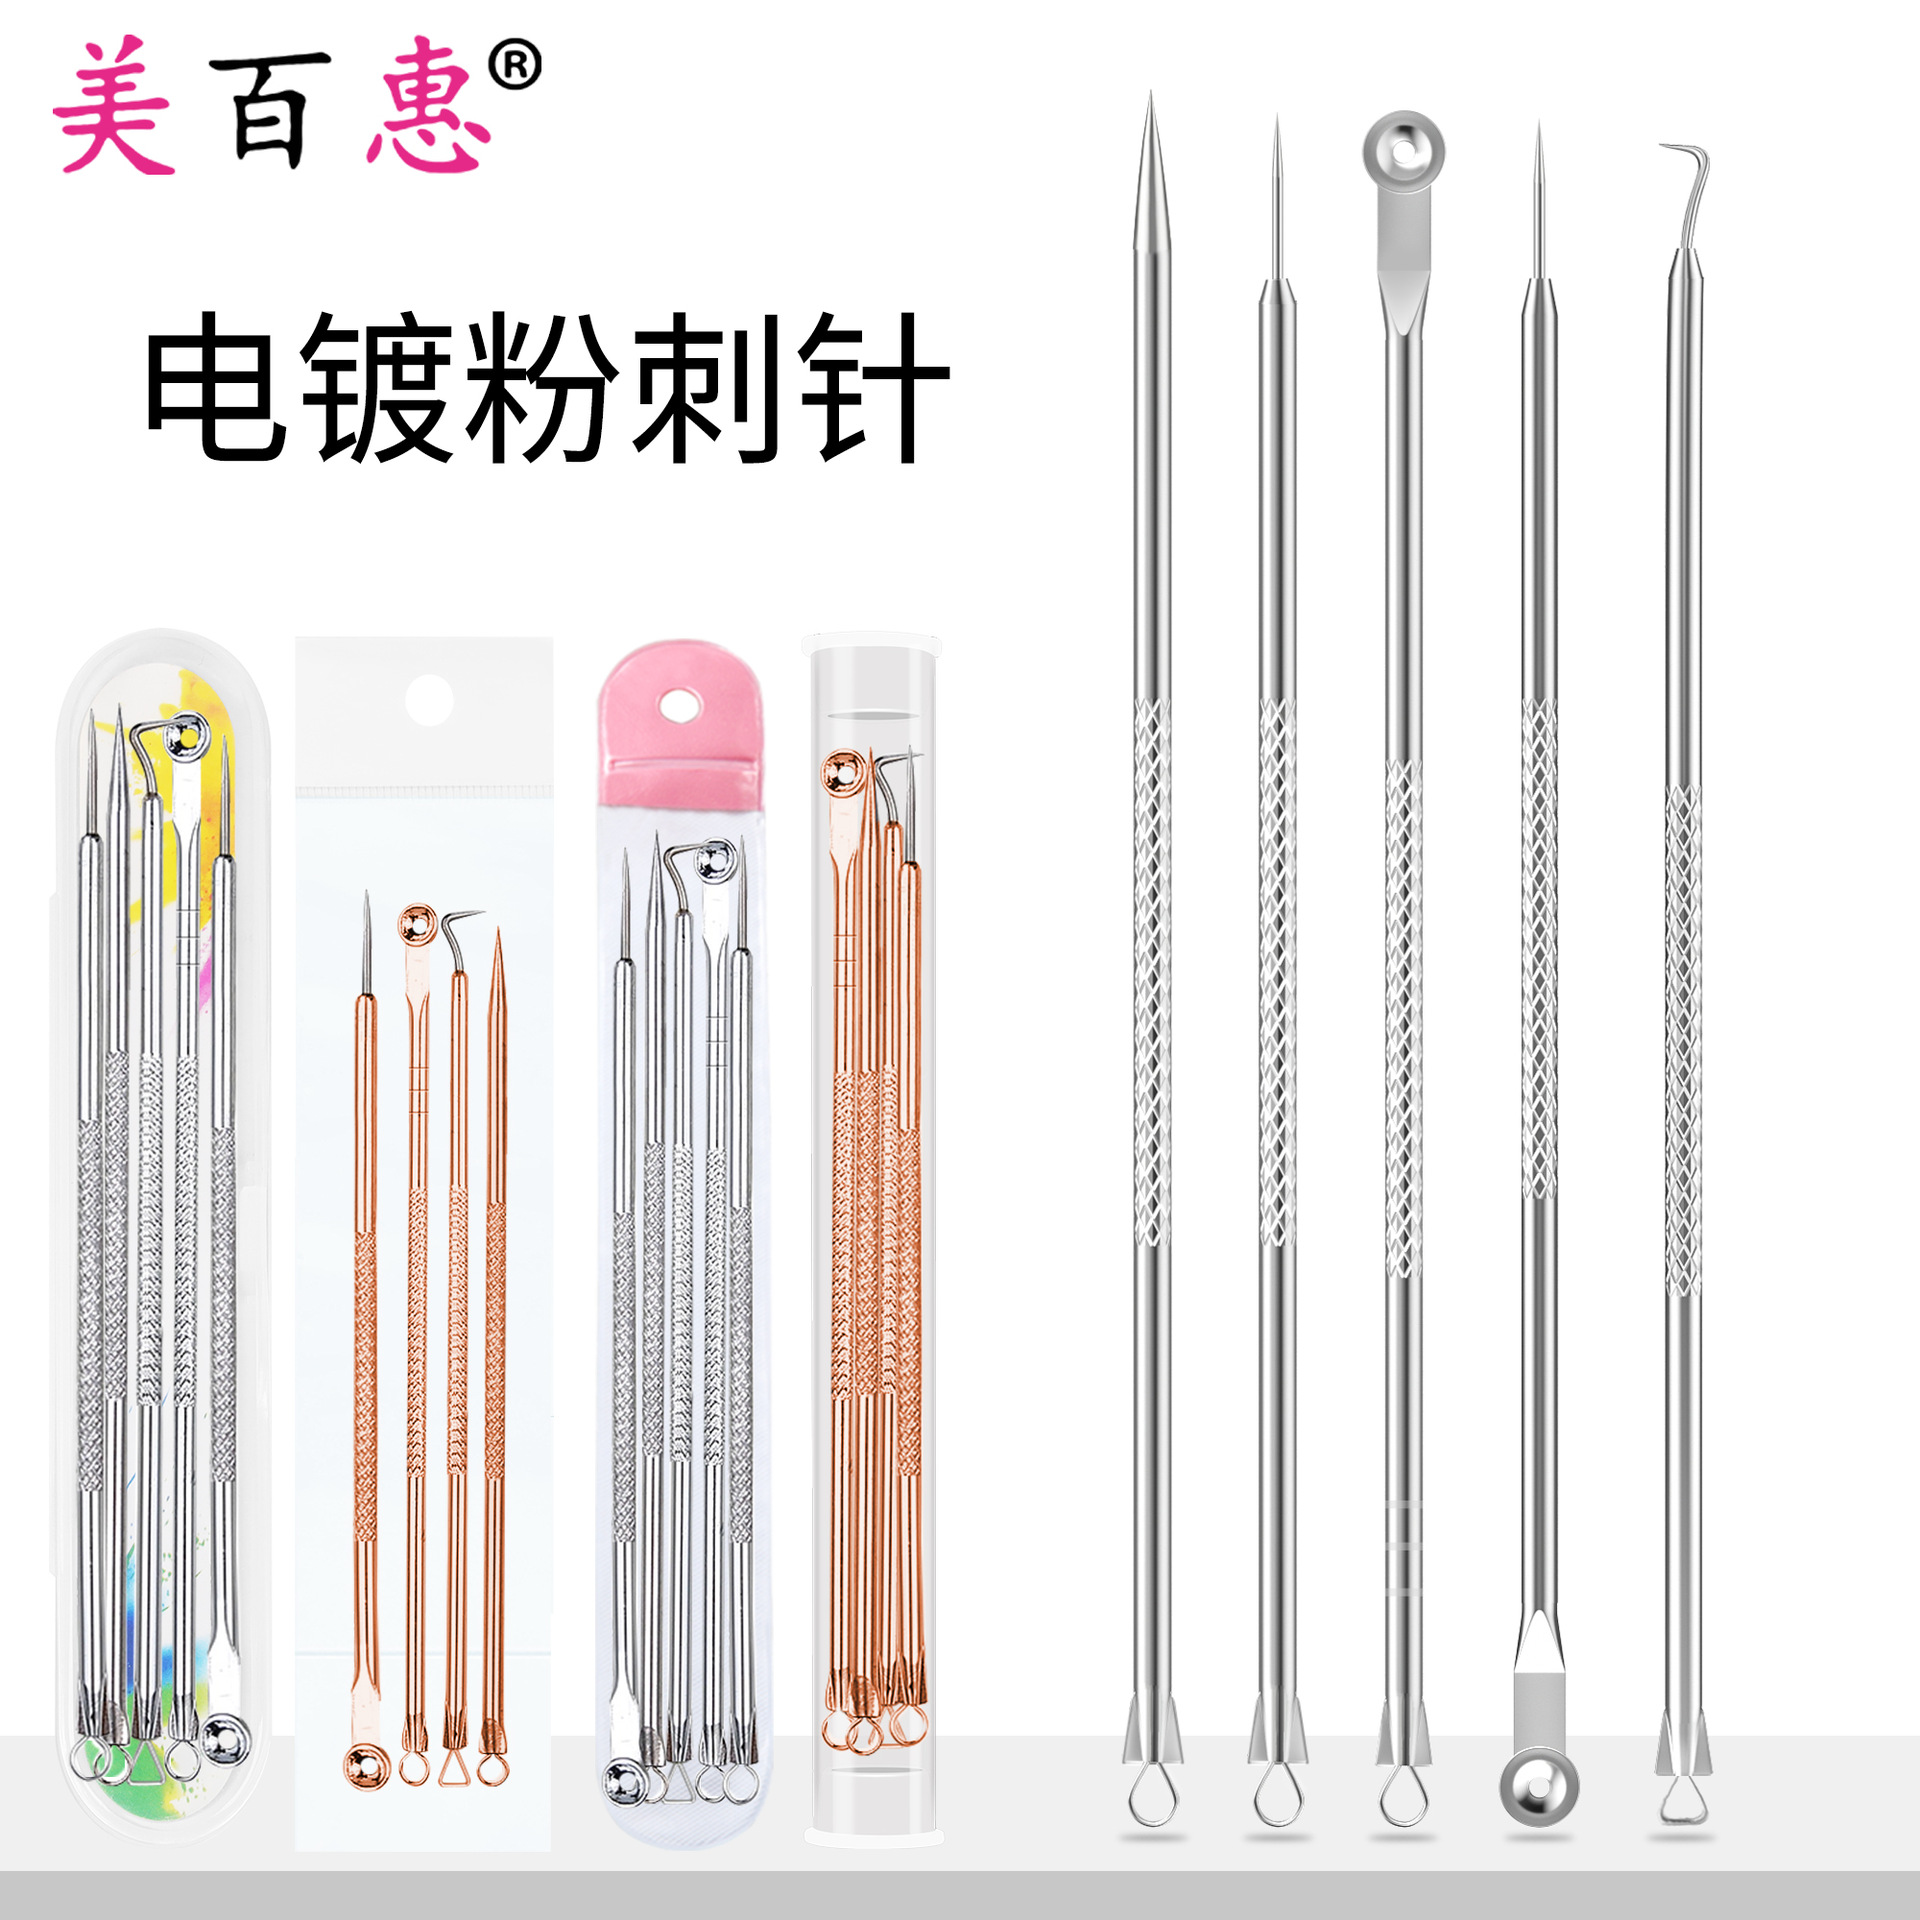 Manufactor wholesale Beauty pin Four piece suit electroplate Stainless steel Double head Acne Needle Acne needle box-packed cosmetology tool